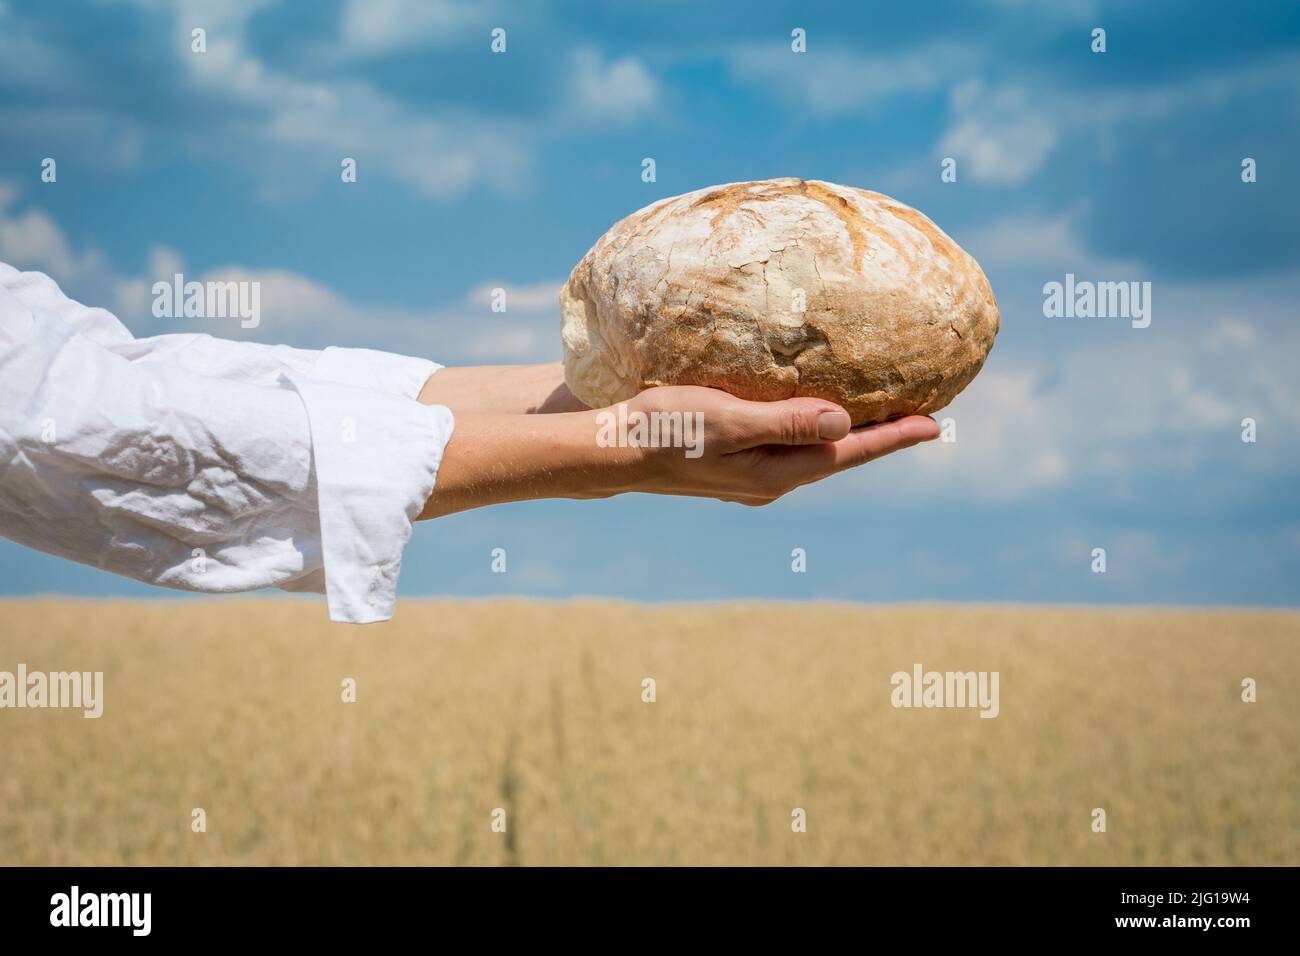 Female hands holding home baked bread loaf over a blue summer sky in a wheat field. World food security concept. Stock Photo